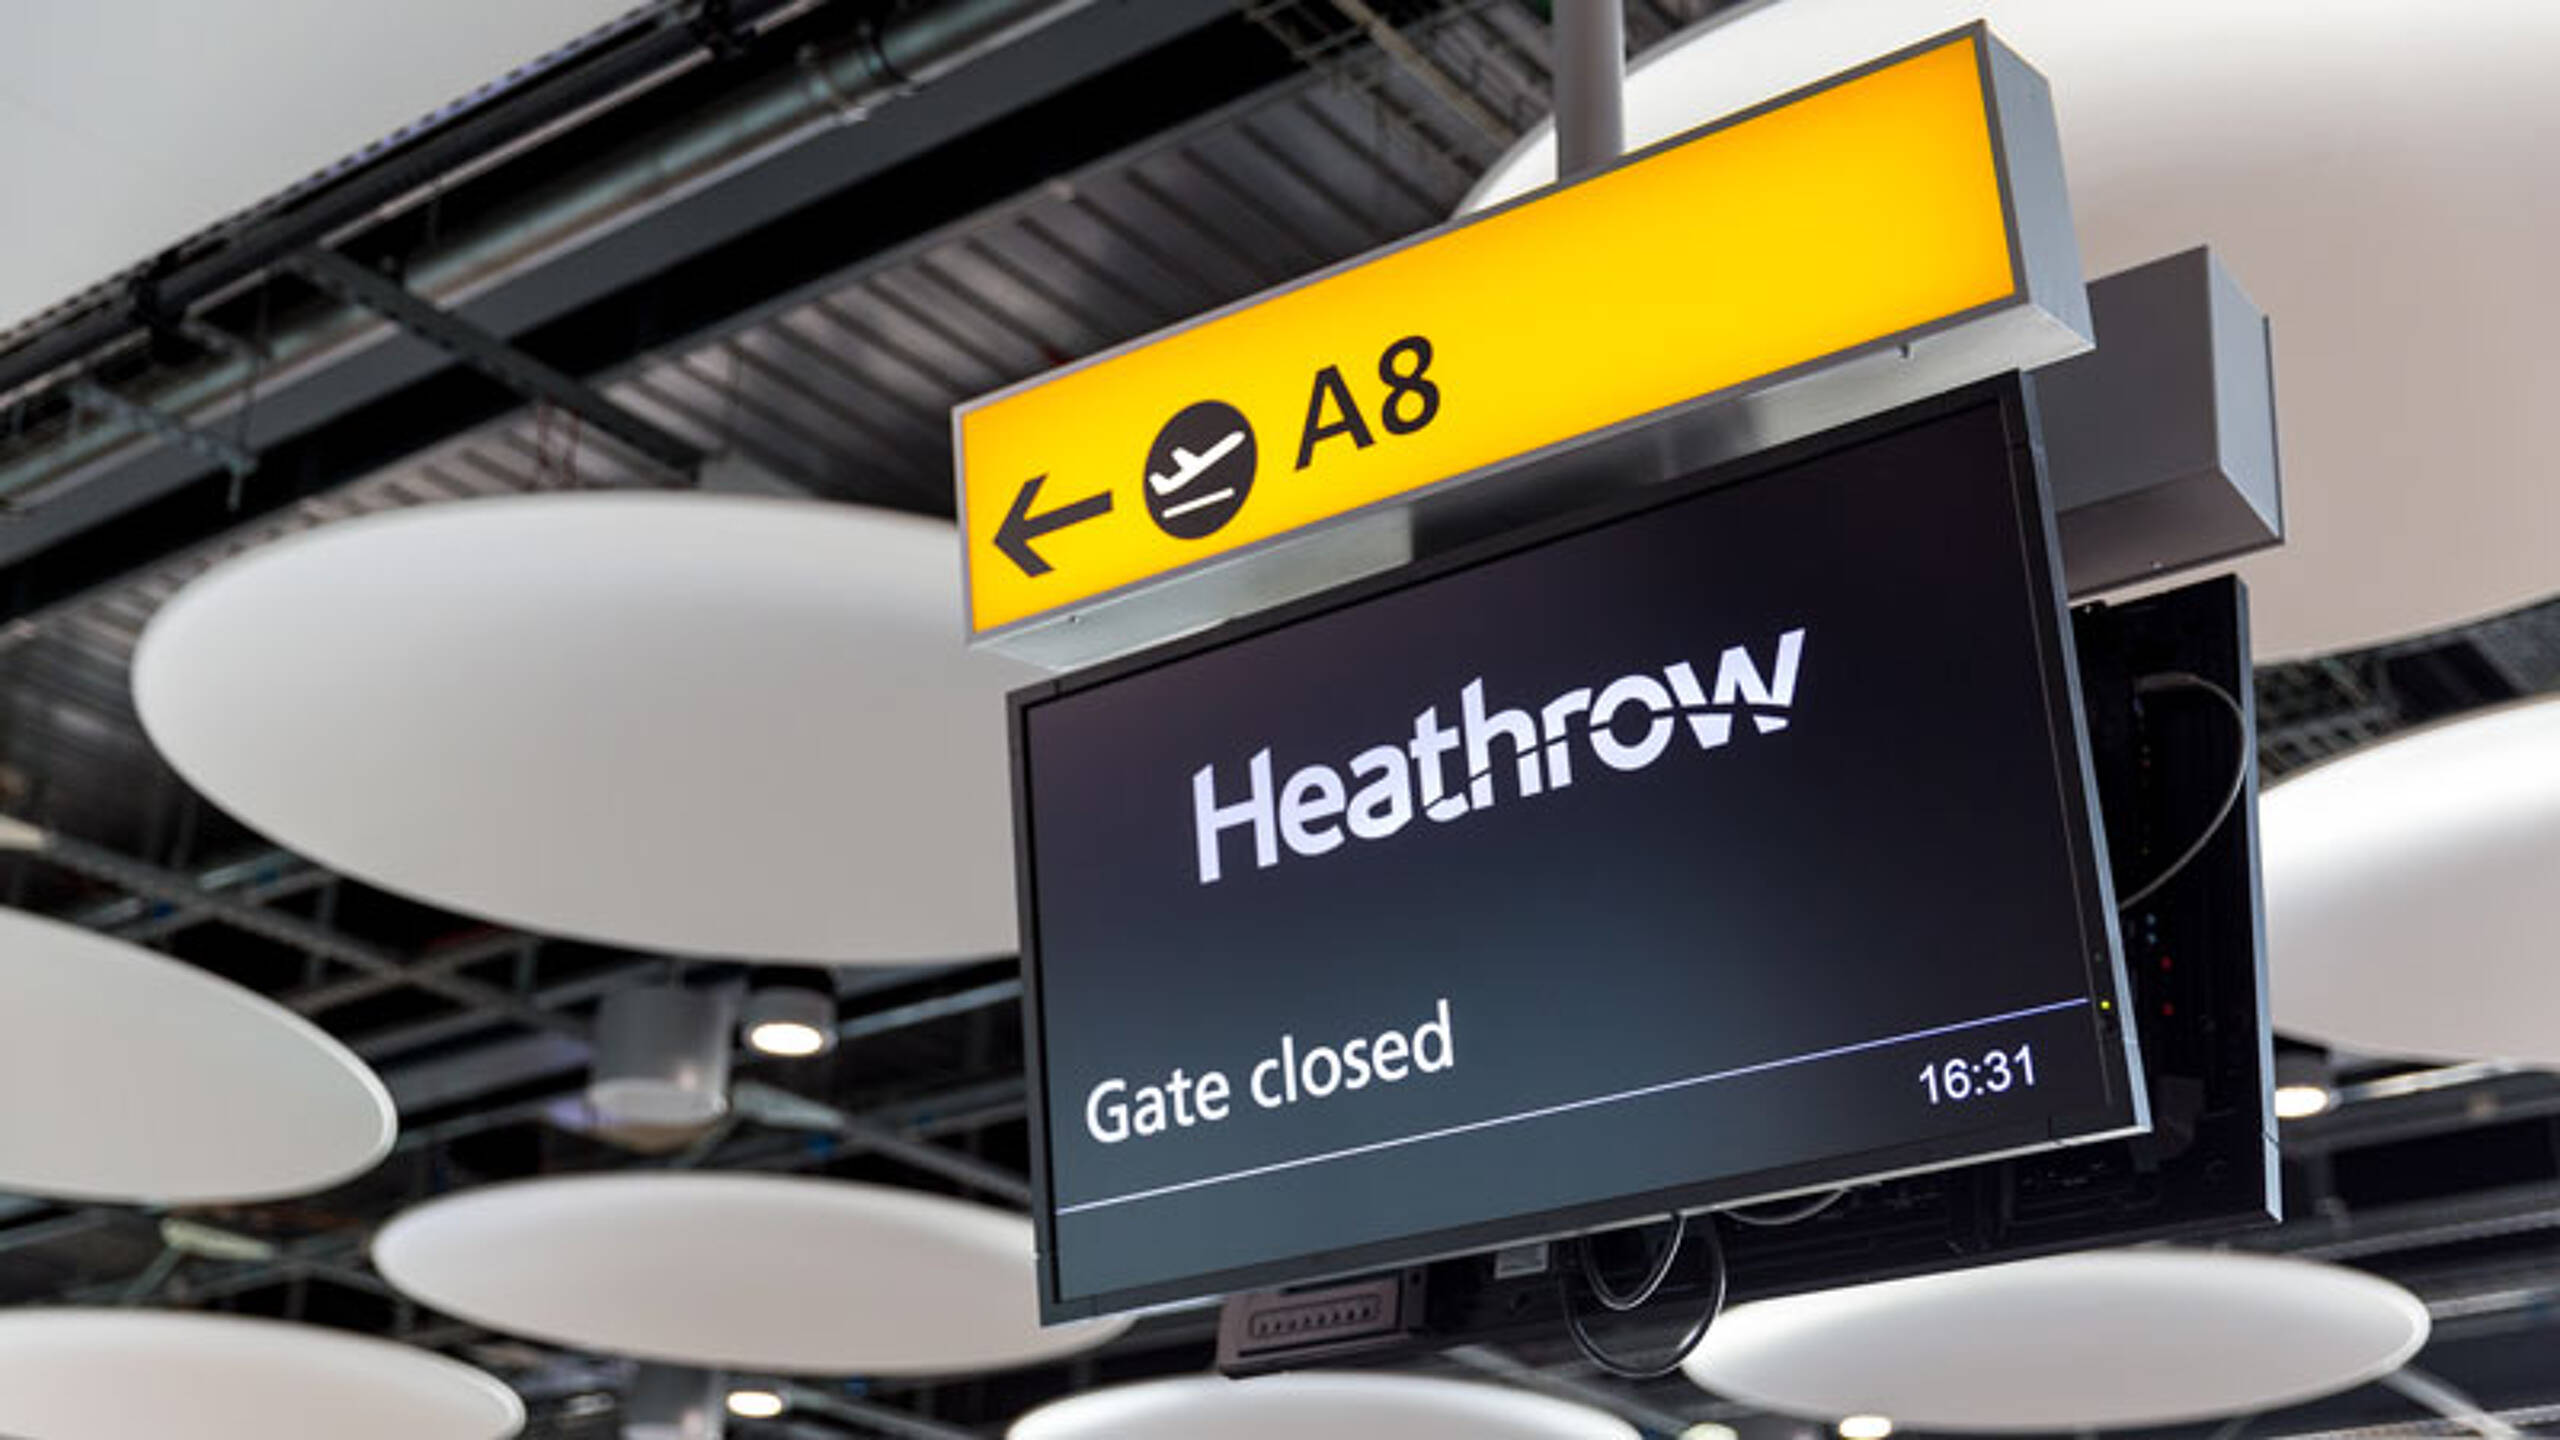 Heathrow extends incentive scheme for alternative fuels with lower carbon footprint